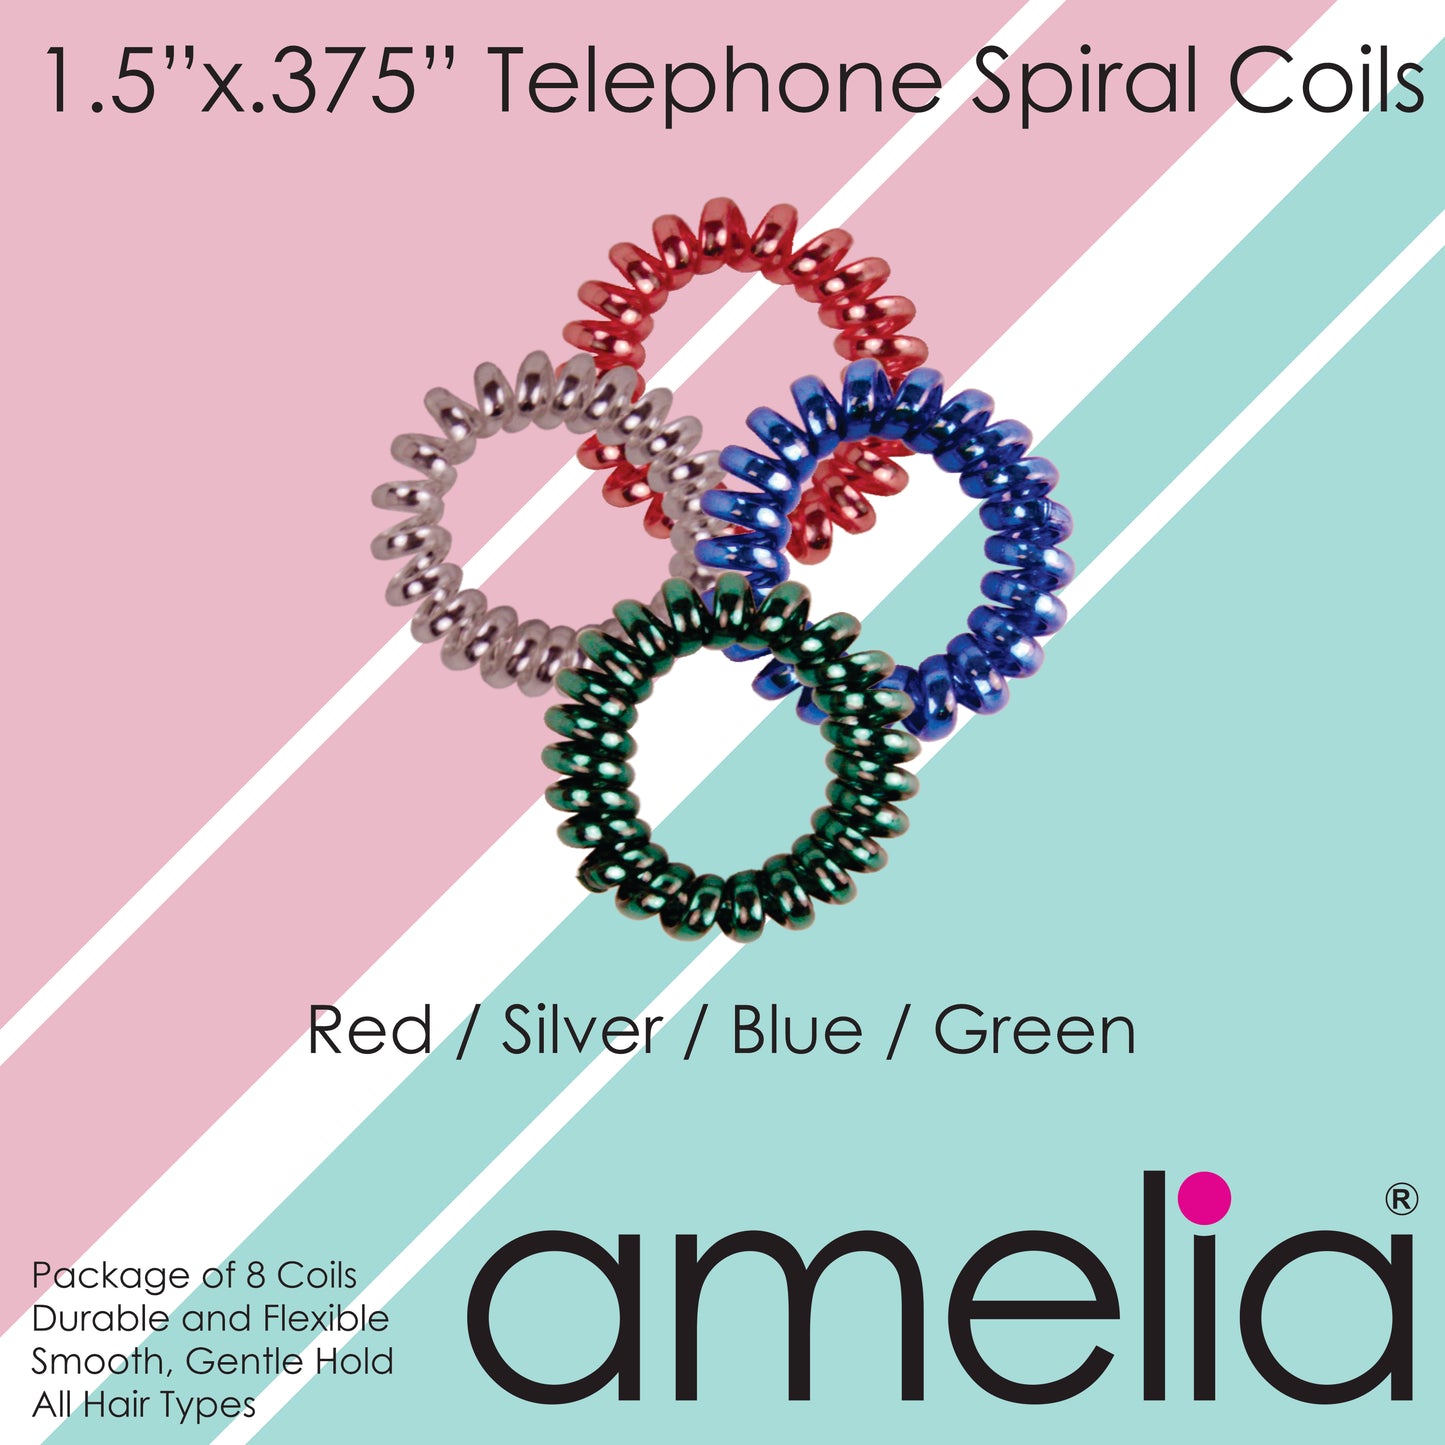 Amelia Beauty, 8 Small Shinny Elastic Hair Telephone Cord Coils, 1.5in Diameter Spiral Hair Ties, Strong Hold, Gentle on Hair, Silver, Red, Blue and Green Mix